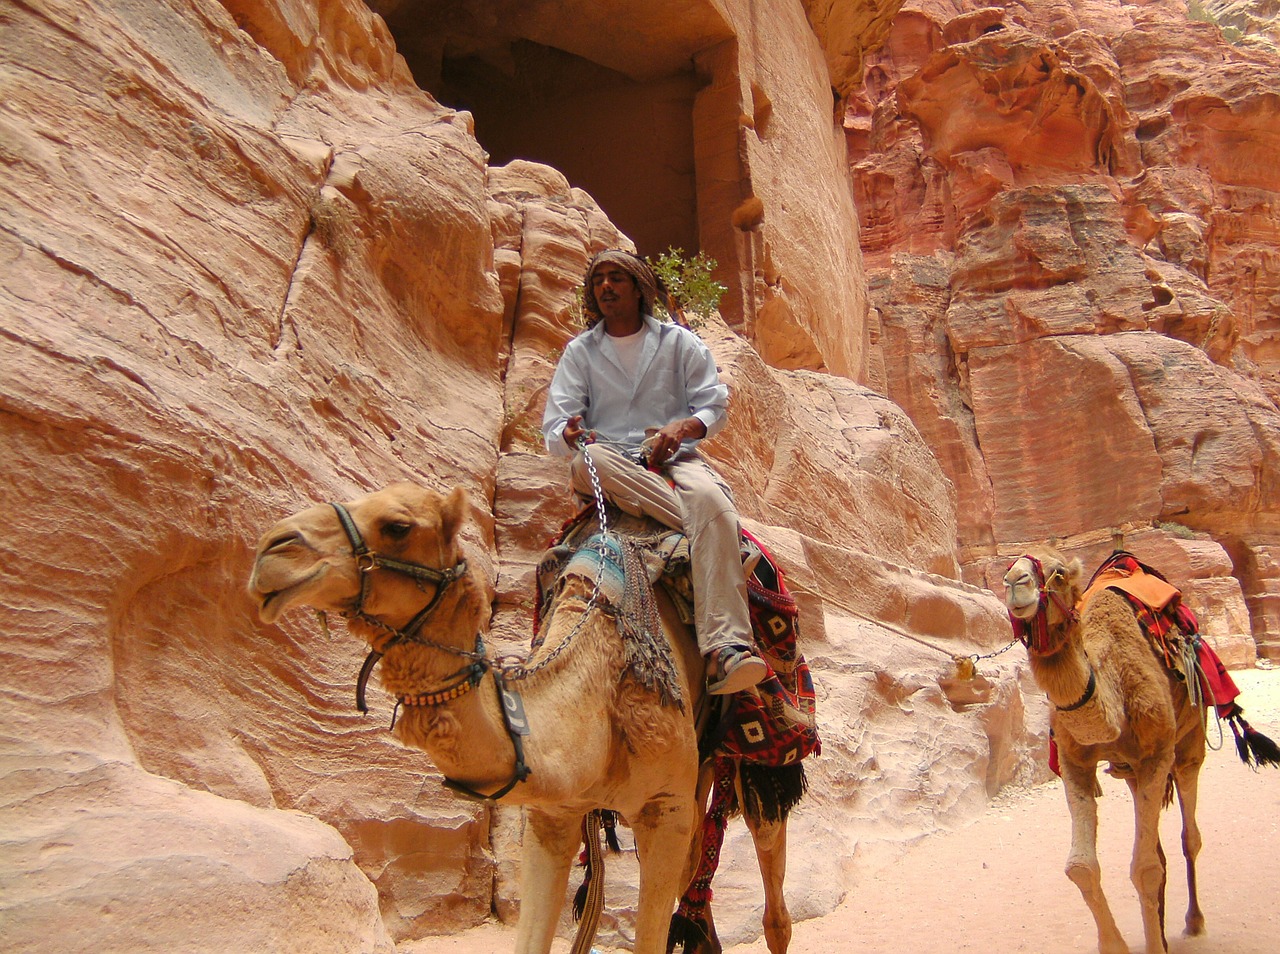 Take a package tour of Jordan to visit sites like Petra